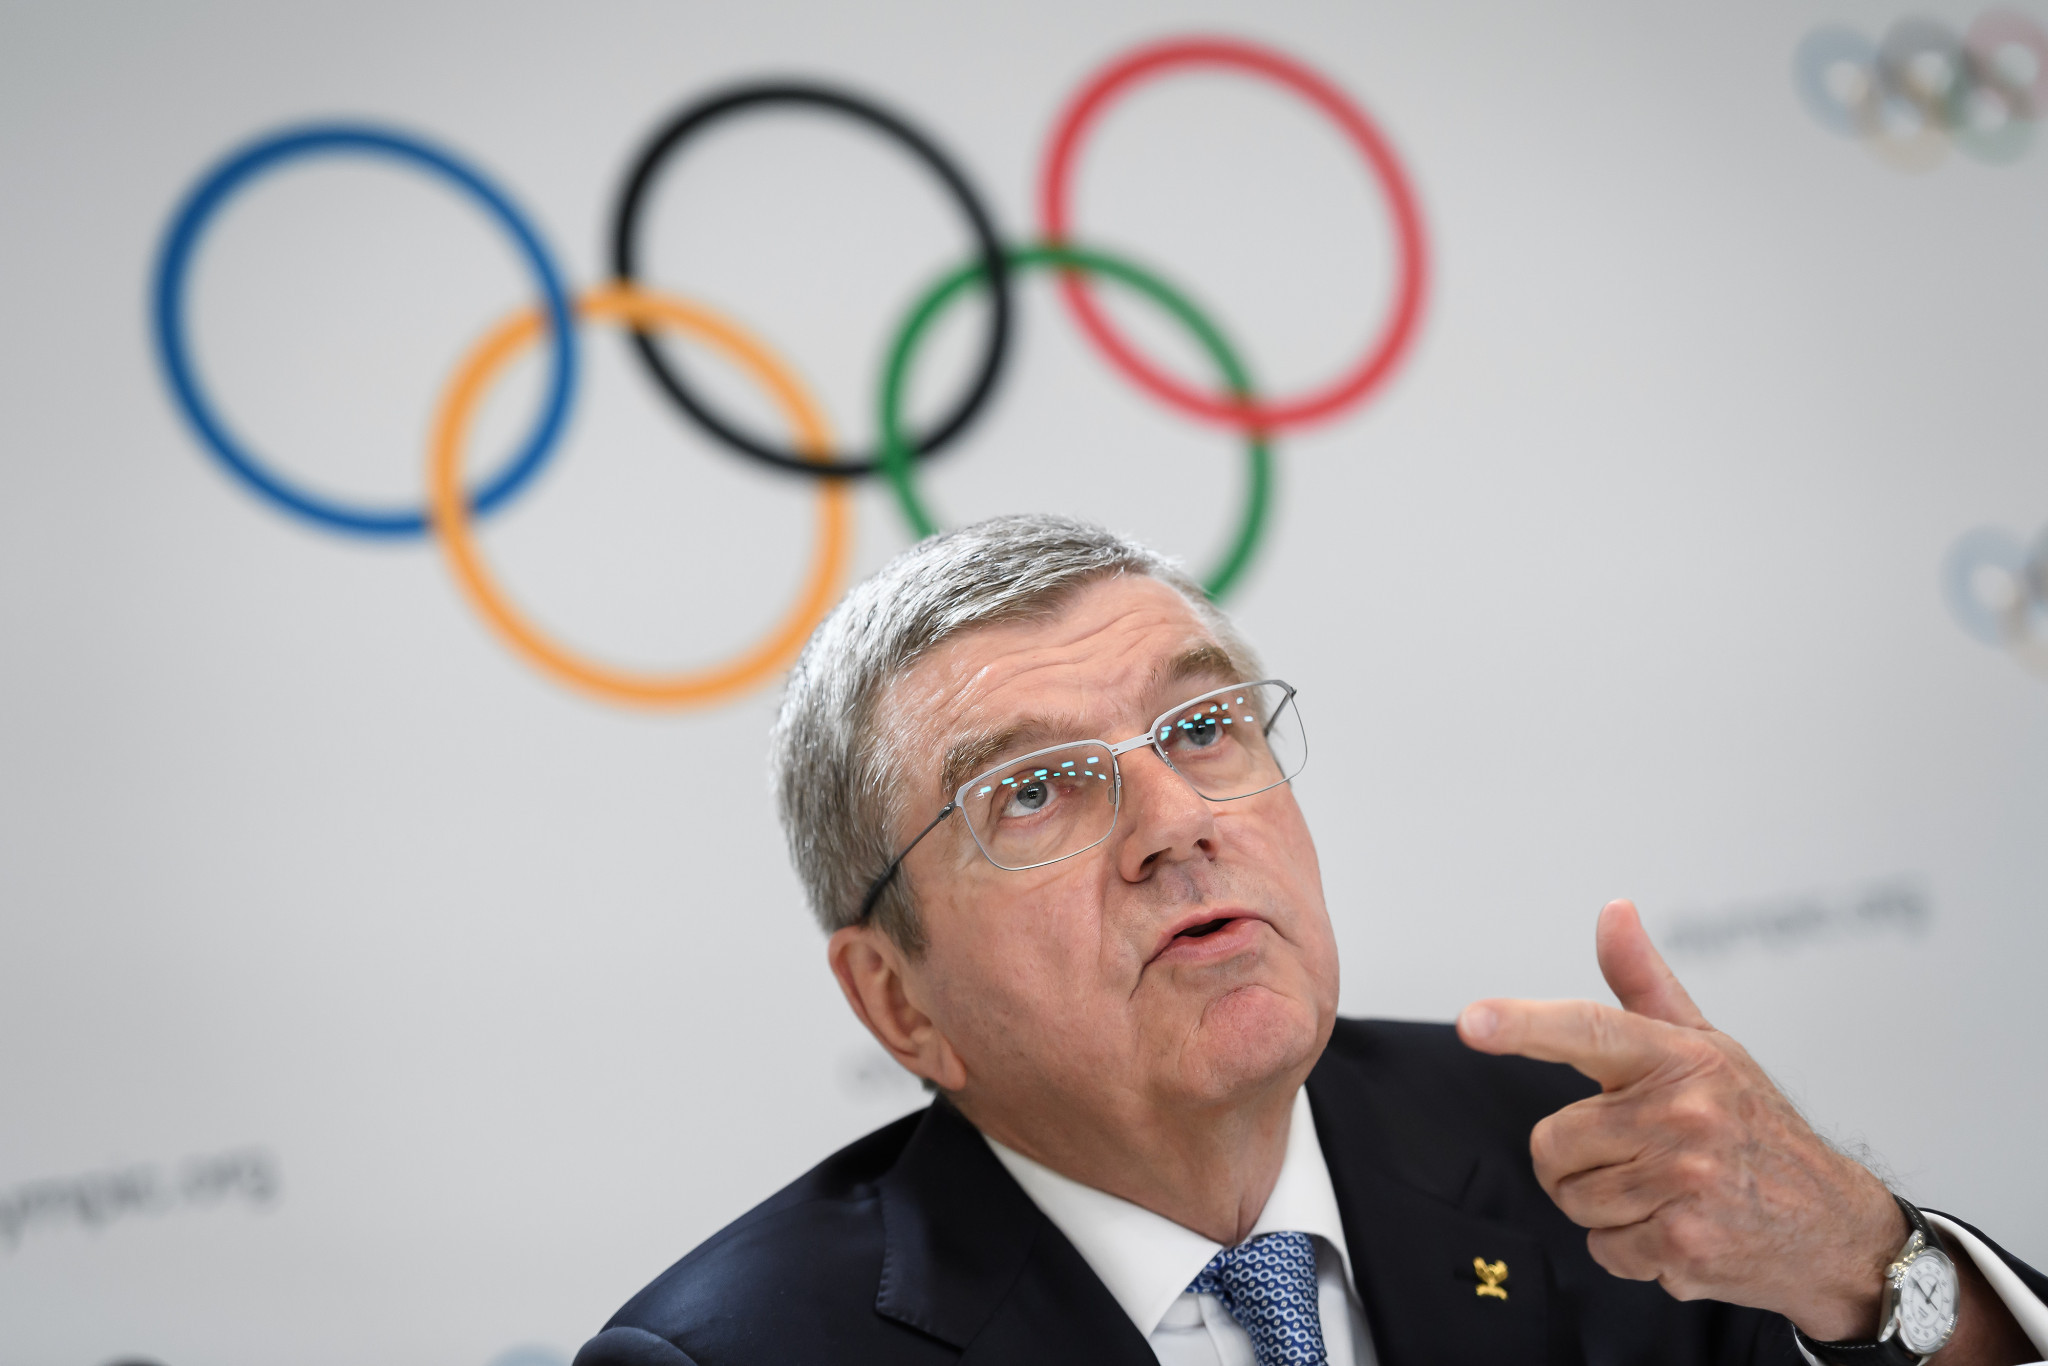 IOC President Thomas Bach praised Sapporo's bid following the meeting today ©Getty Images